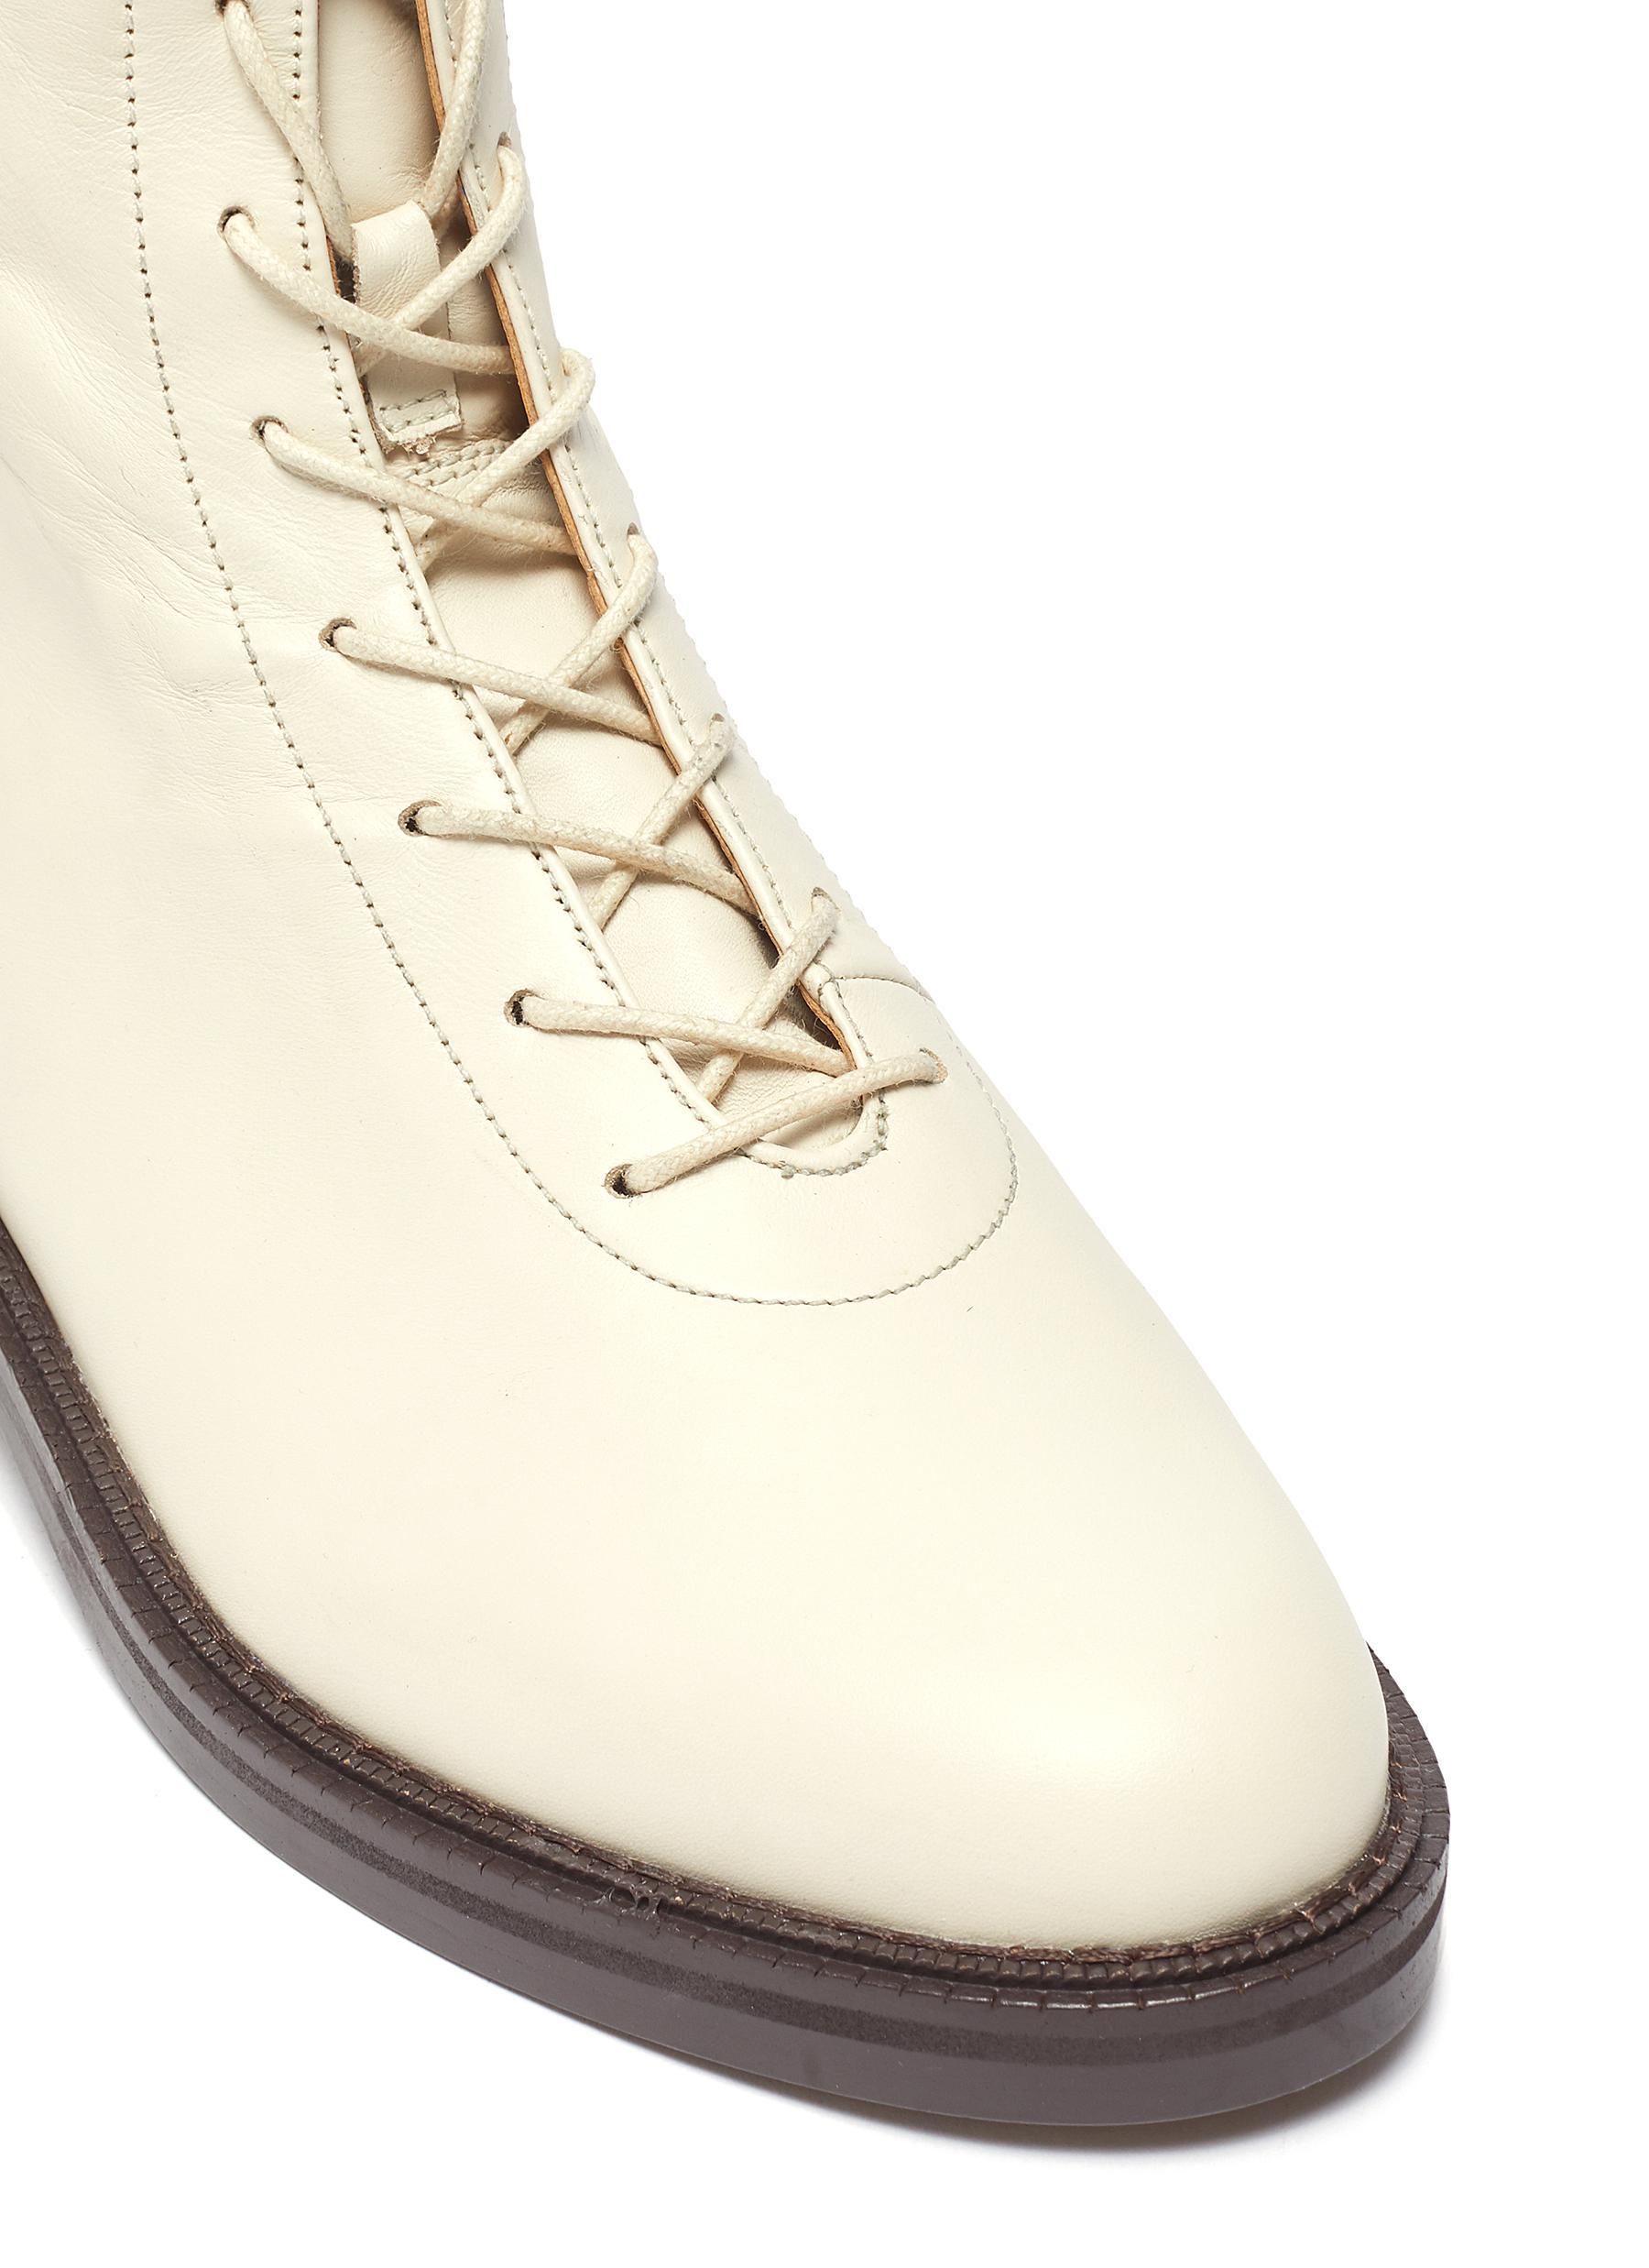 Sam Edelman 'nellyn' Leather Combat Boots in White - Lyst